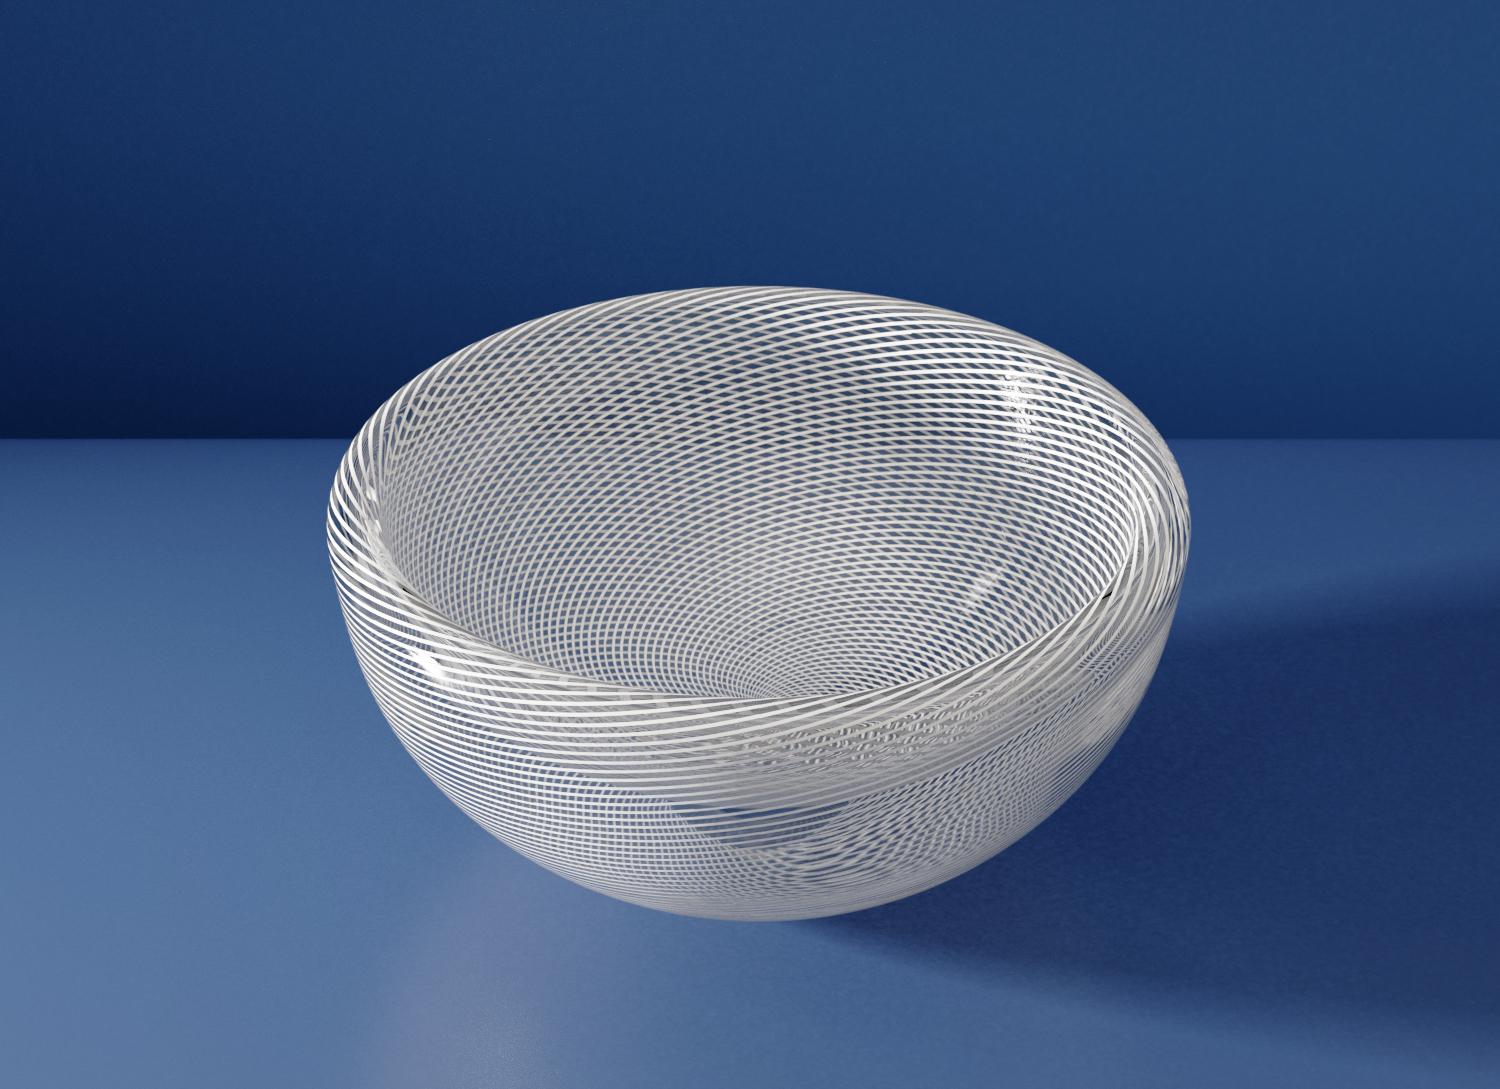 Blown Glass KEEP Zephyr, Handblown Glass Bowl, Mid-Century Inspired Patterned Glass For Sale